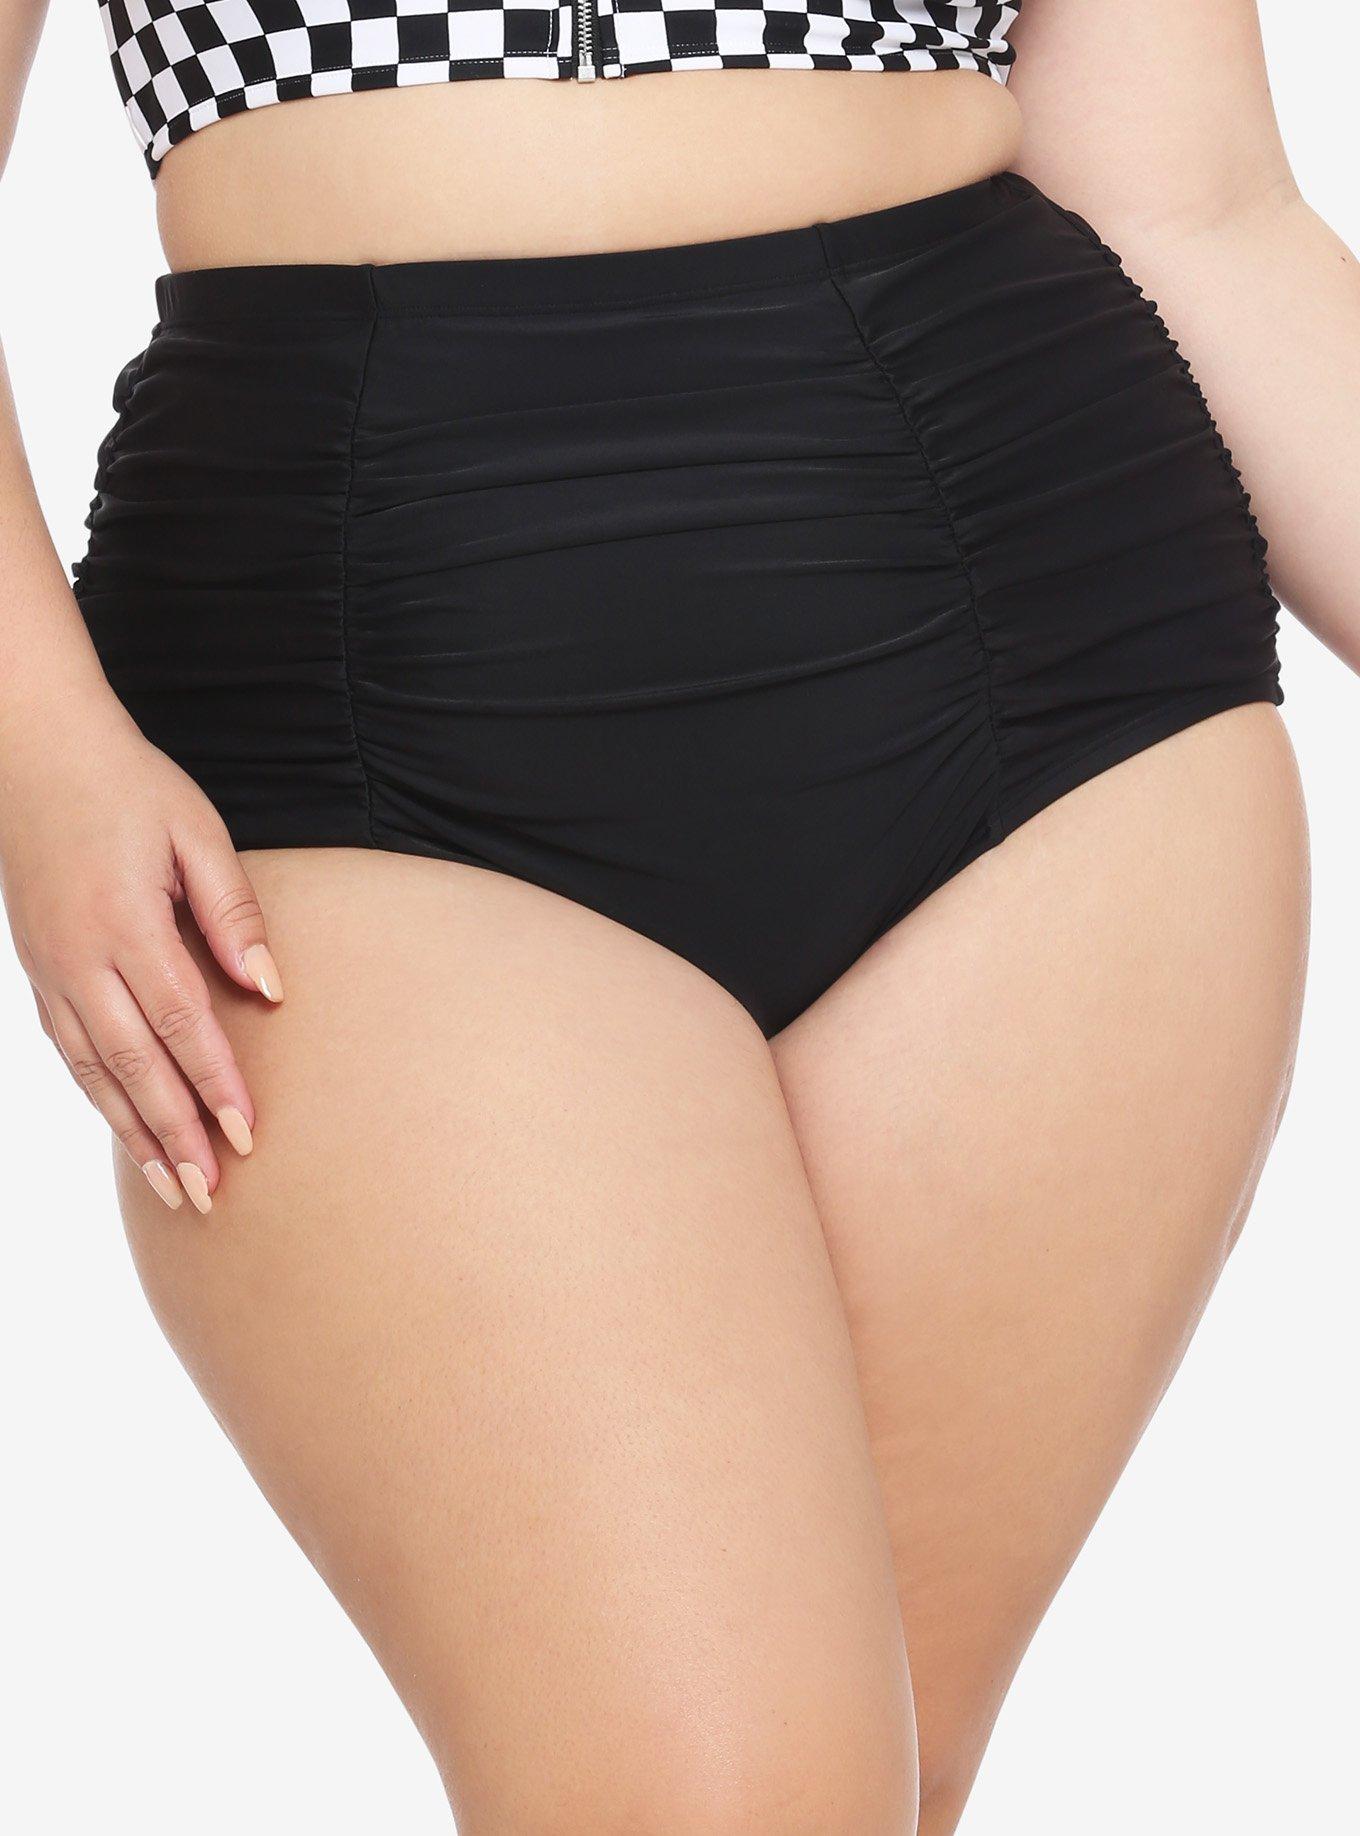 Black Ruched High-Waisted Swim Bottoms Plus Size, WHITE, hi-res